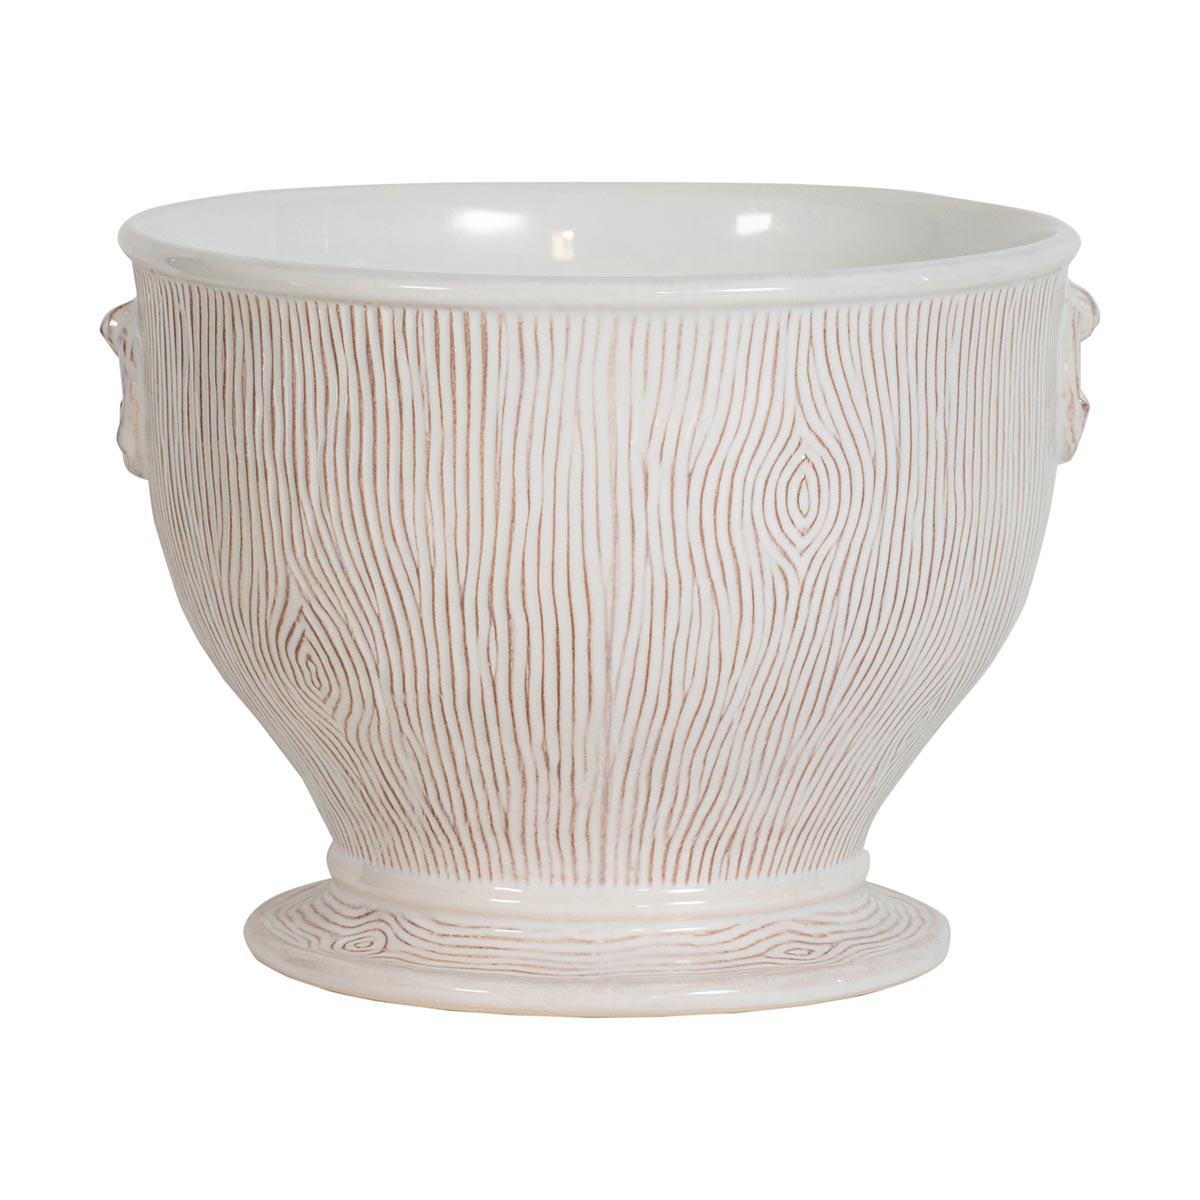 Filled with flowers, herbs, or evergreens, this cachepot is designed for all occasions and all seasons -- you’ll want one (or better yet, a pair!) on hand for a fresh infusion of natural beauty to grace your tabletop, entryway, mantel or nook. Done in our elegant and enchanting woodgrain motif in a peaceful palette of creams and warm browns with our signature whitewash glaze and a warm patina, to easily mix and match with other patterns and collections.